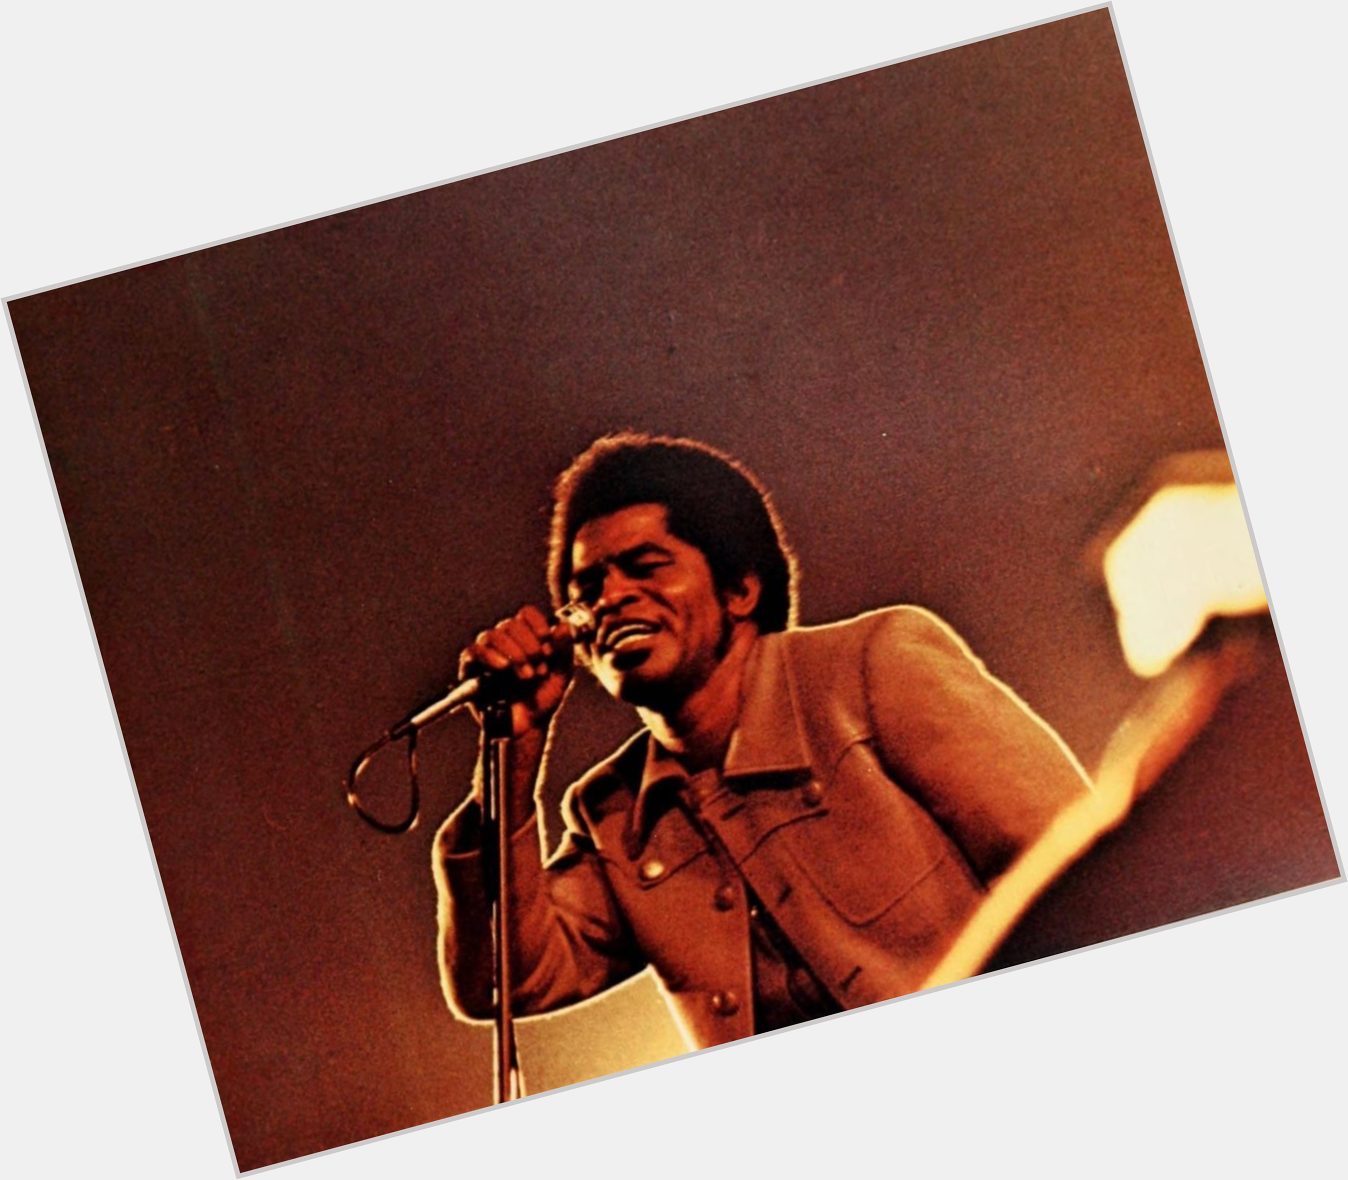 Happy Birthday to James Brown!  What are your top 4 songs by The Godfather of Soul? 